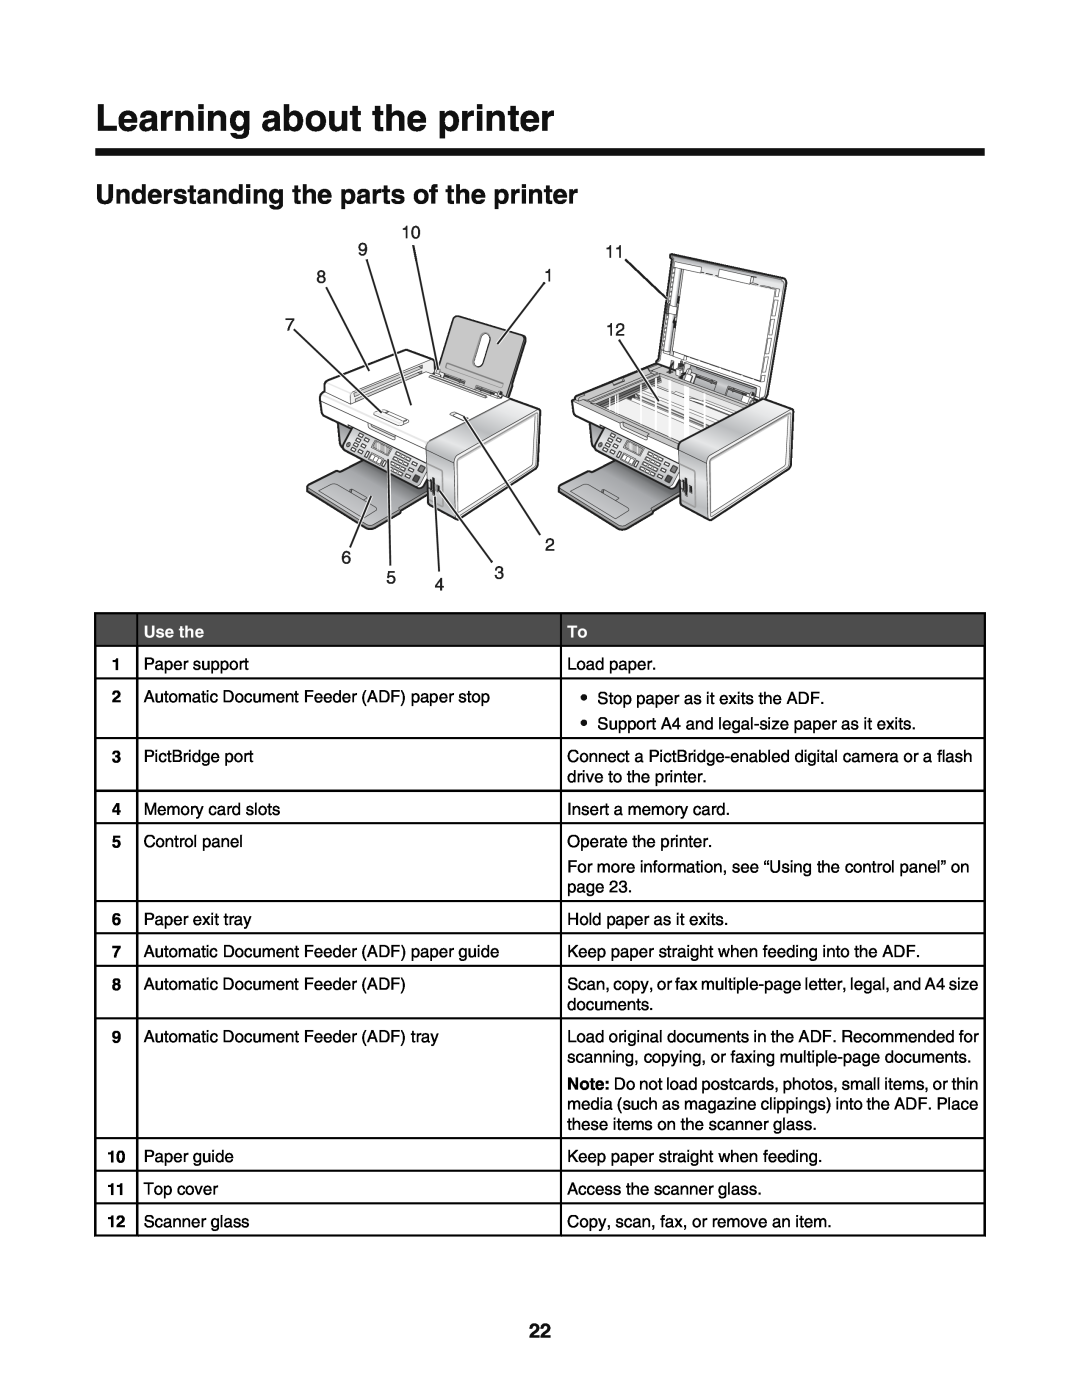 Lexmark 5400 manual Learning about the printer, Understanding the parts of the printer, Use the 